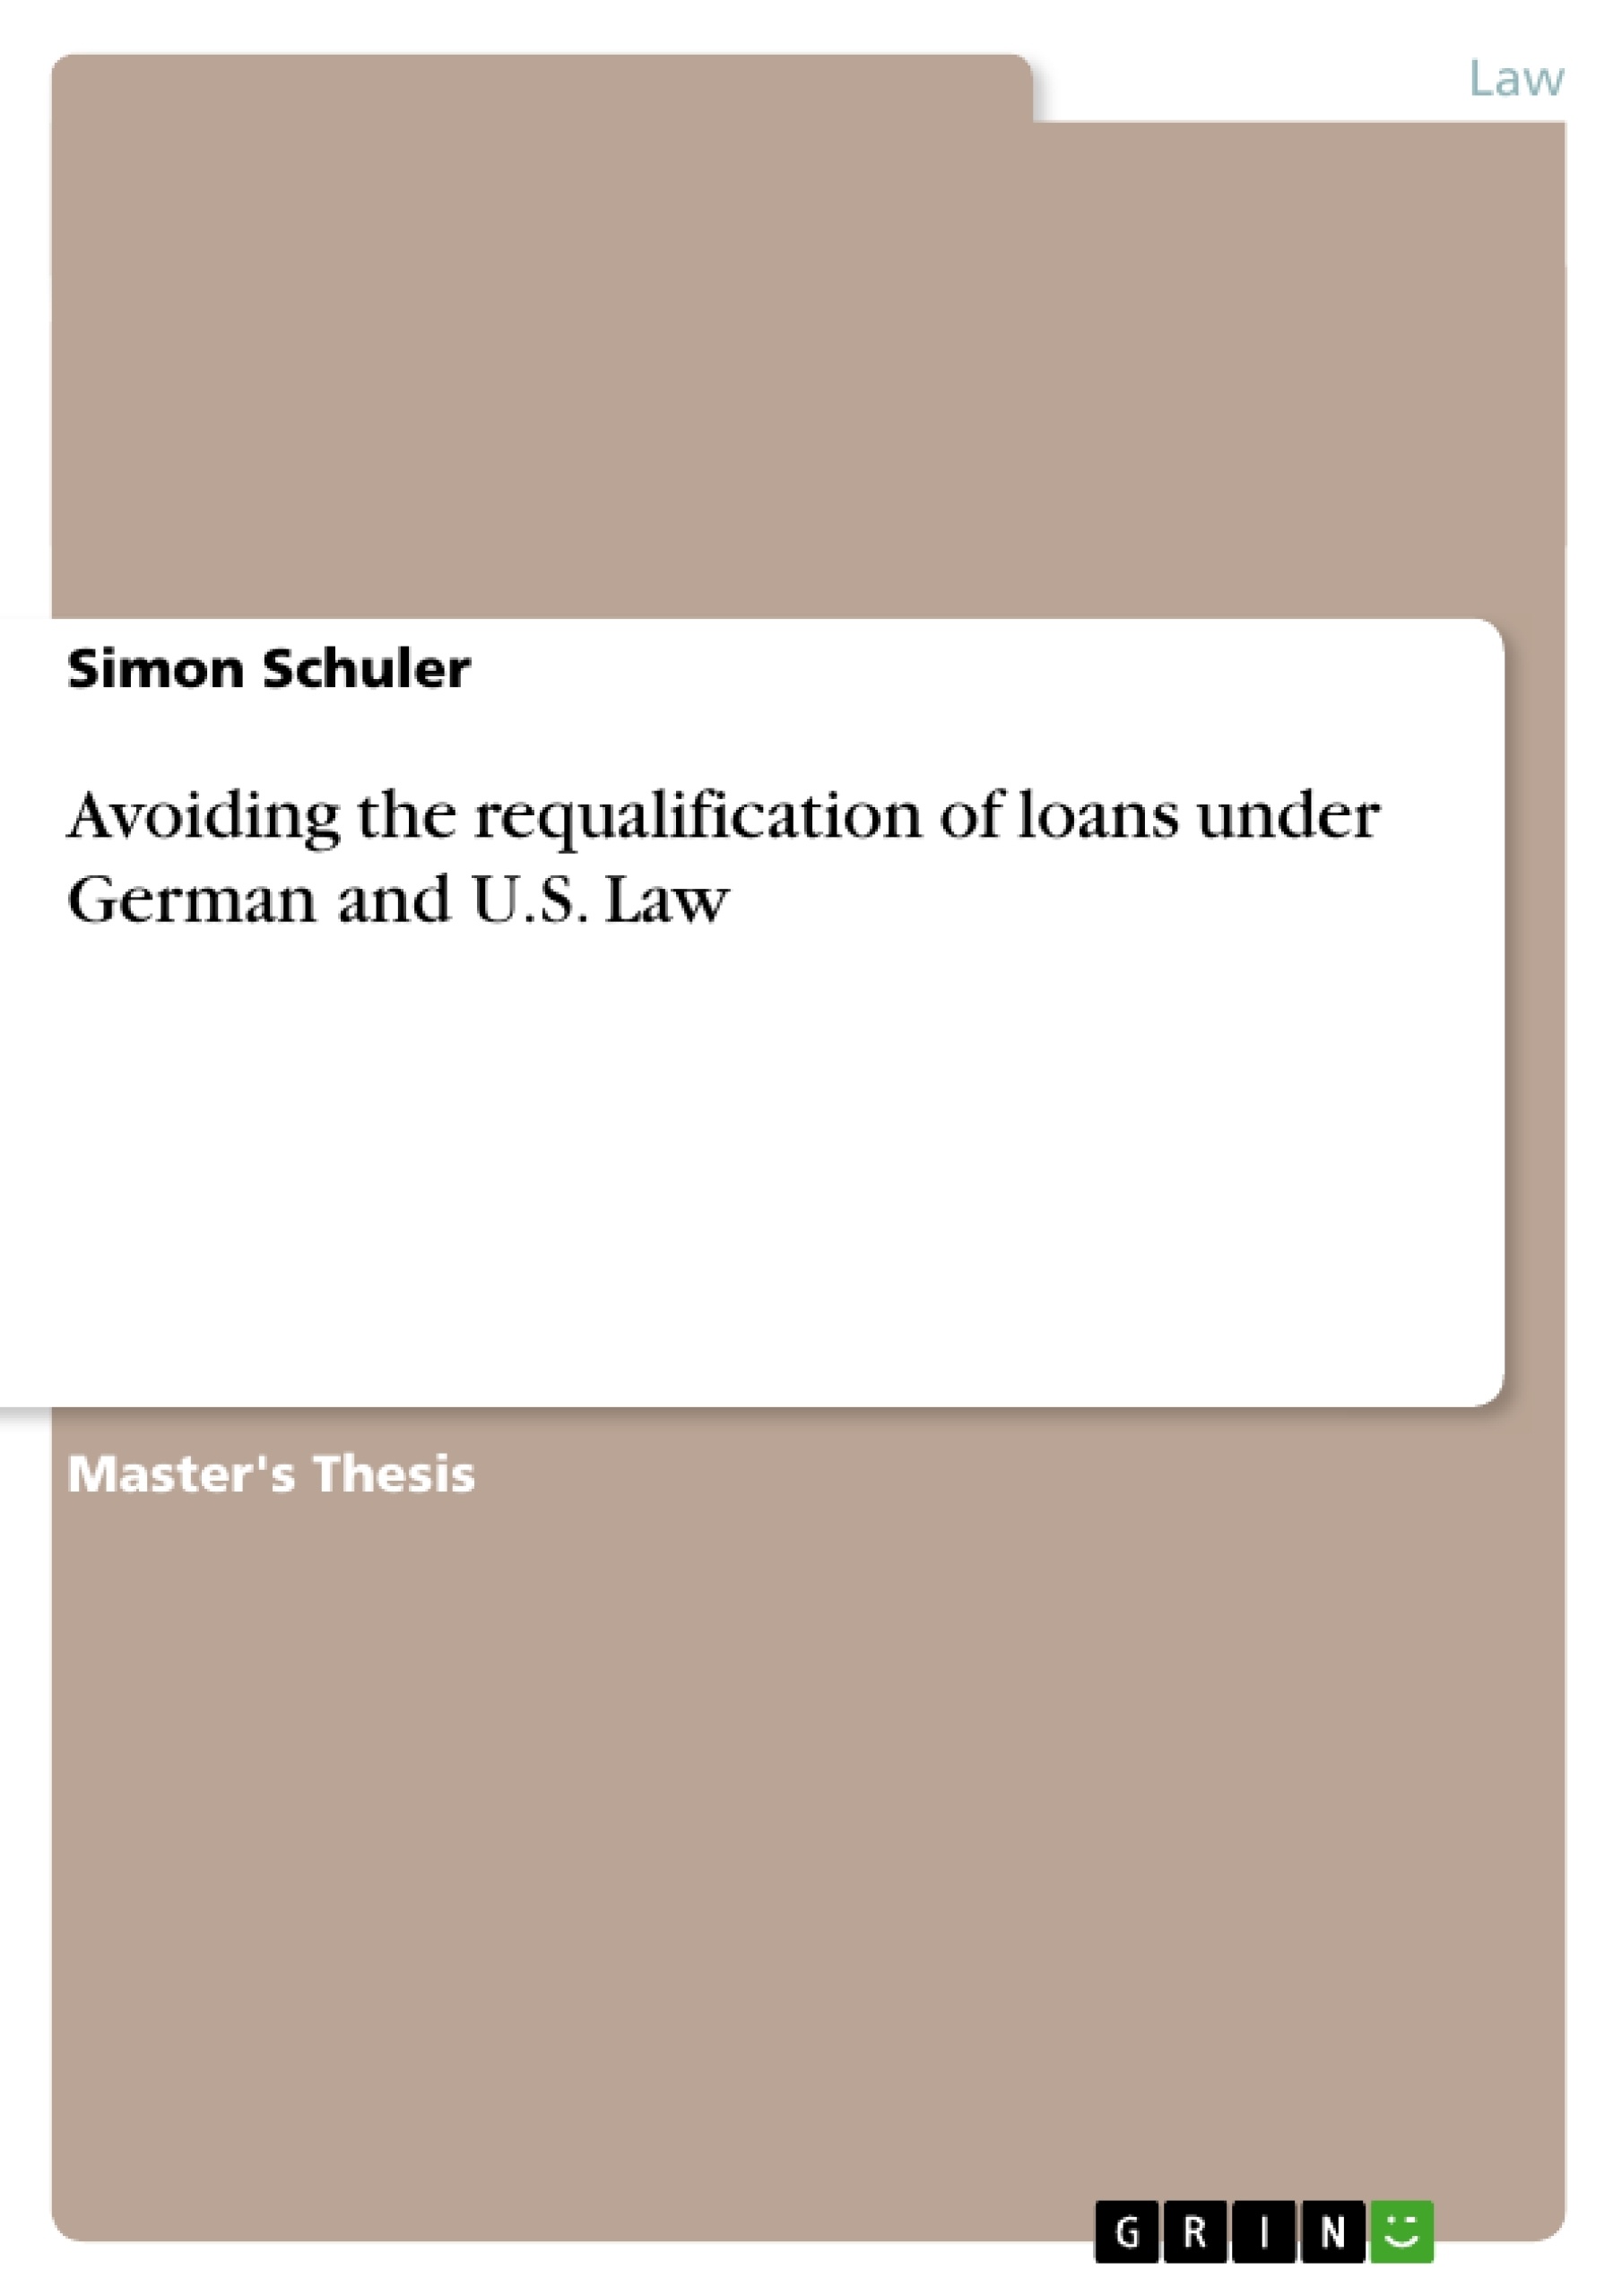 Titel: Avoiding the requalification of loans under German and U.S. Law